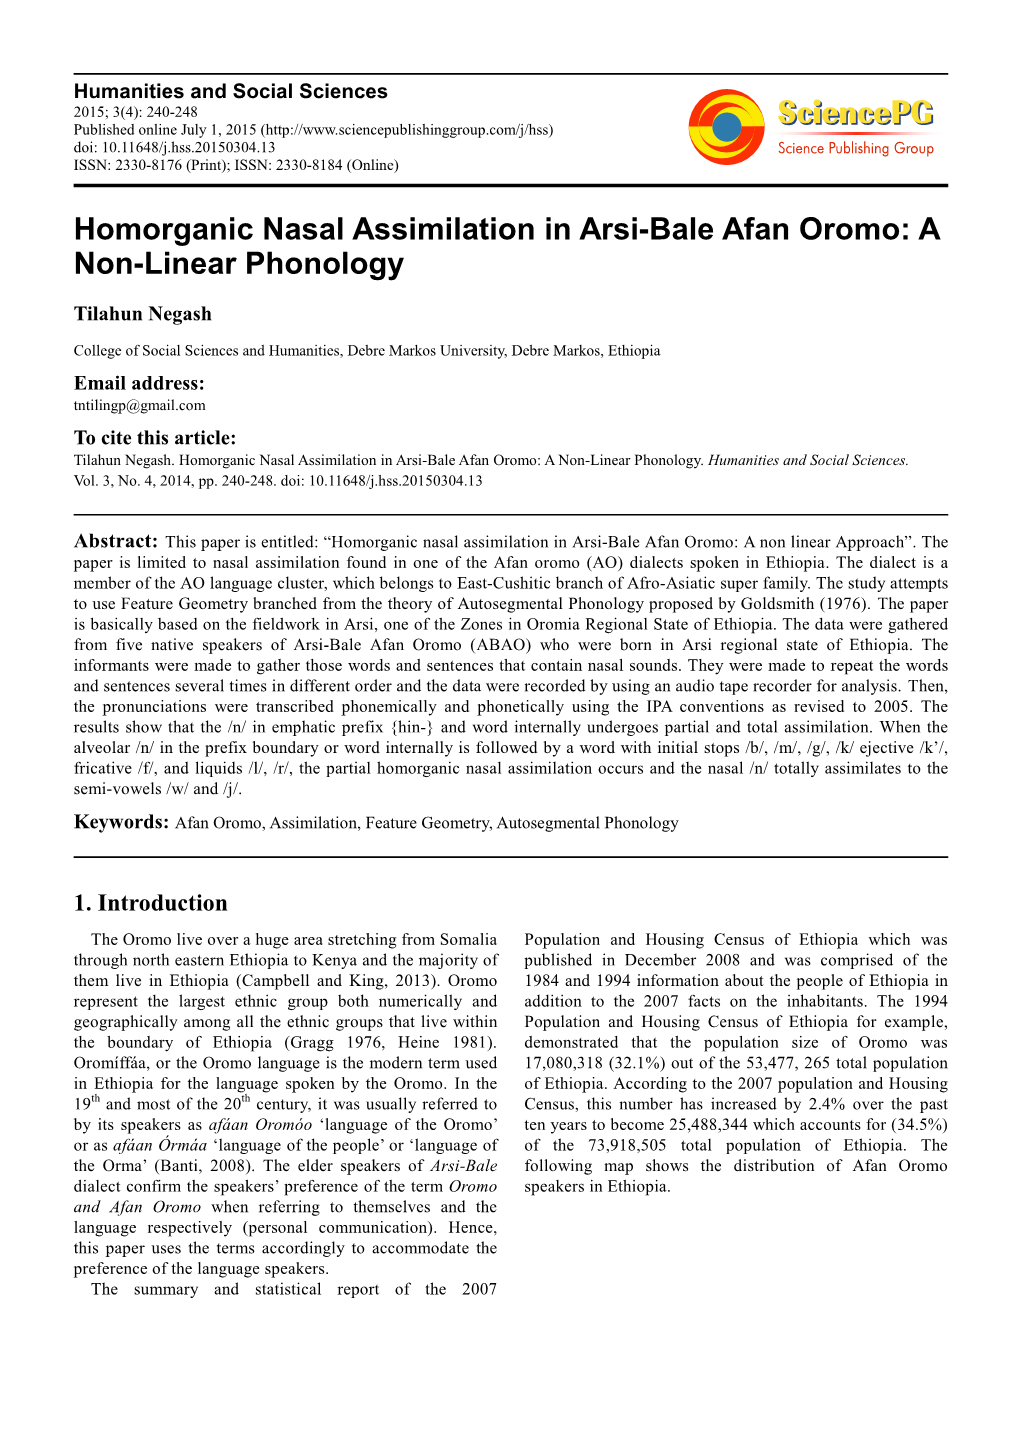 Homorganic Nasal Assimilation in Arsi-Bale Afan Oromo: a Non-Linear Phonology